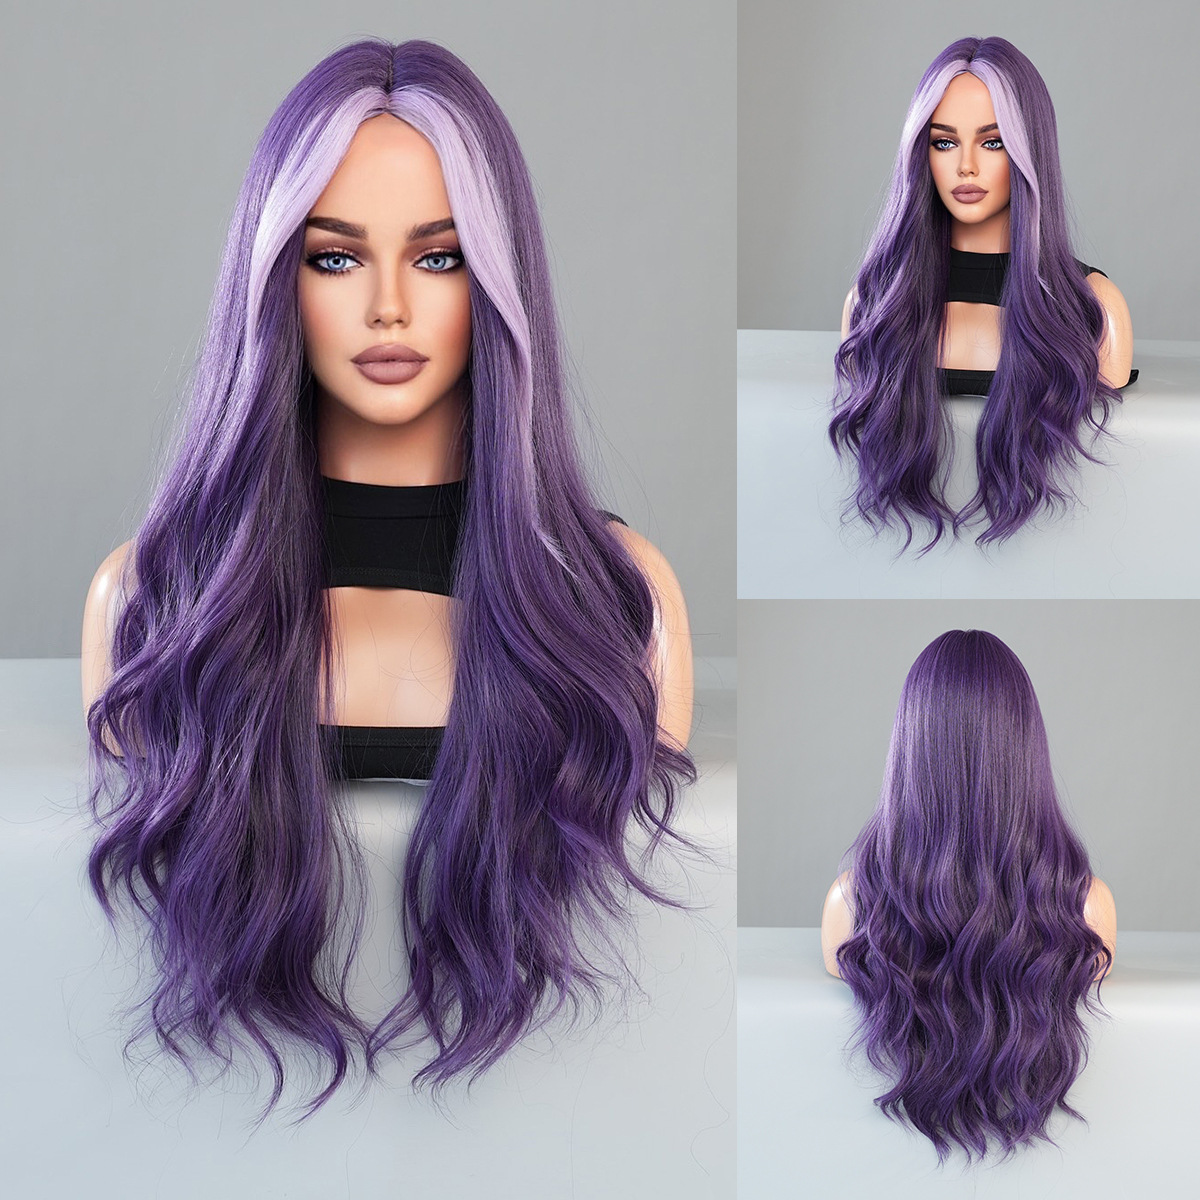 Channel royal elegance with this large wavy synthetic wig, featuring luxurious purple highlights for a regal look